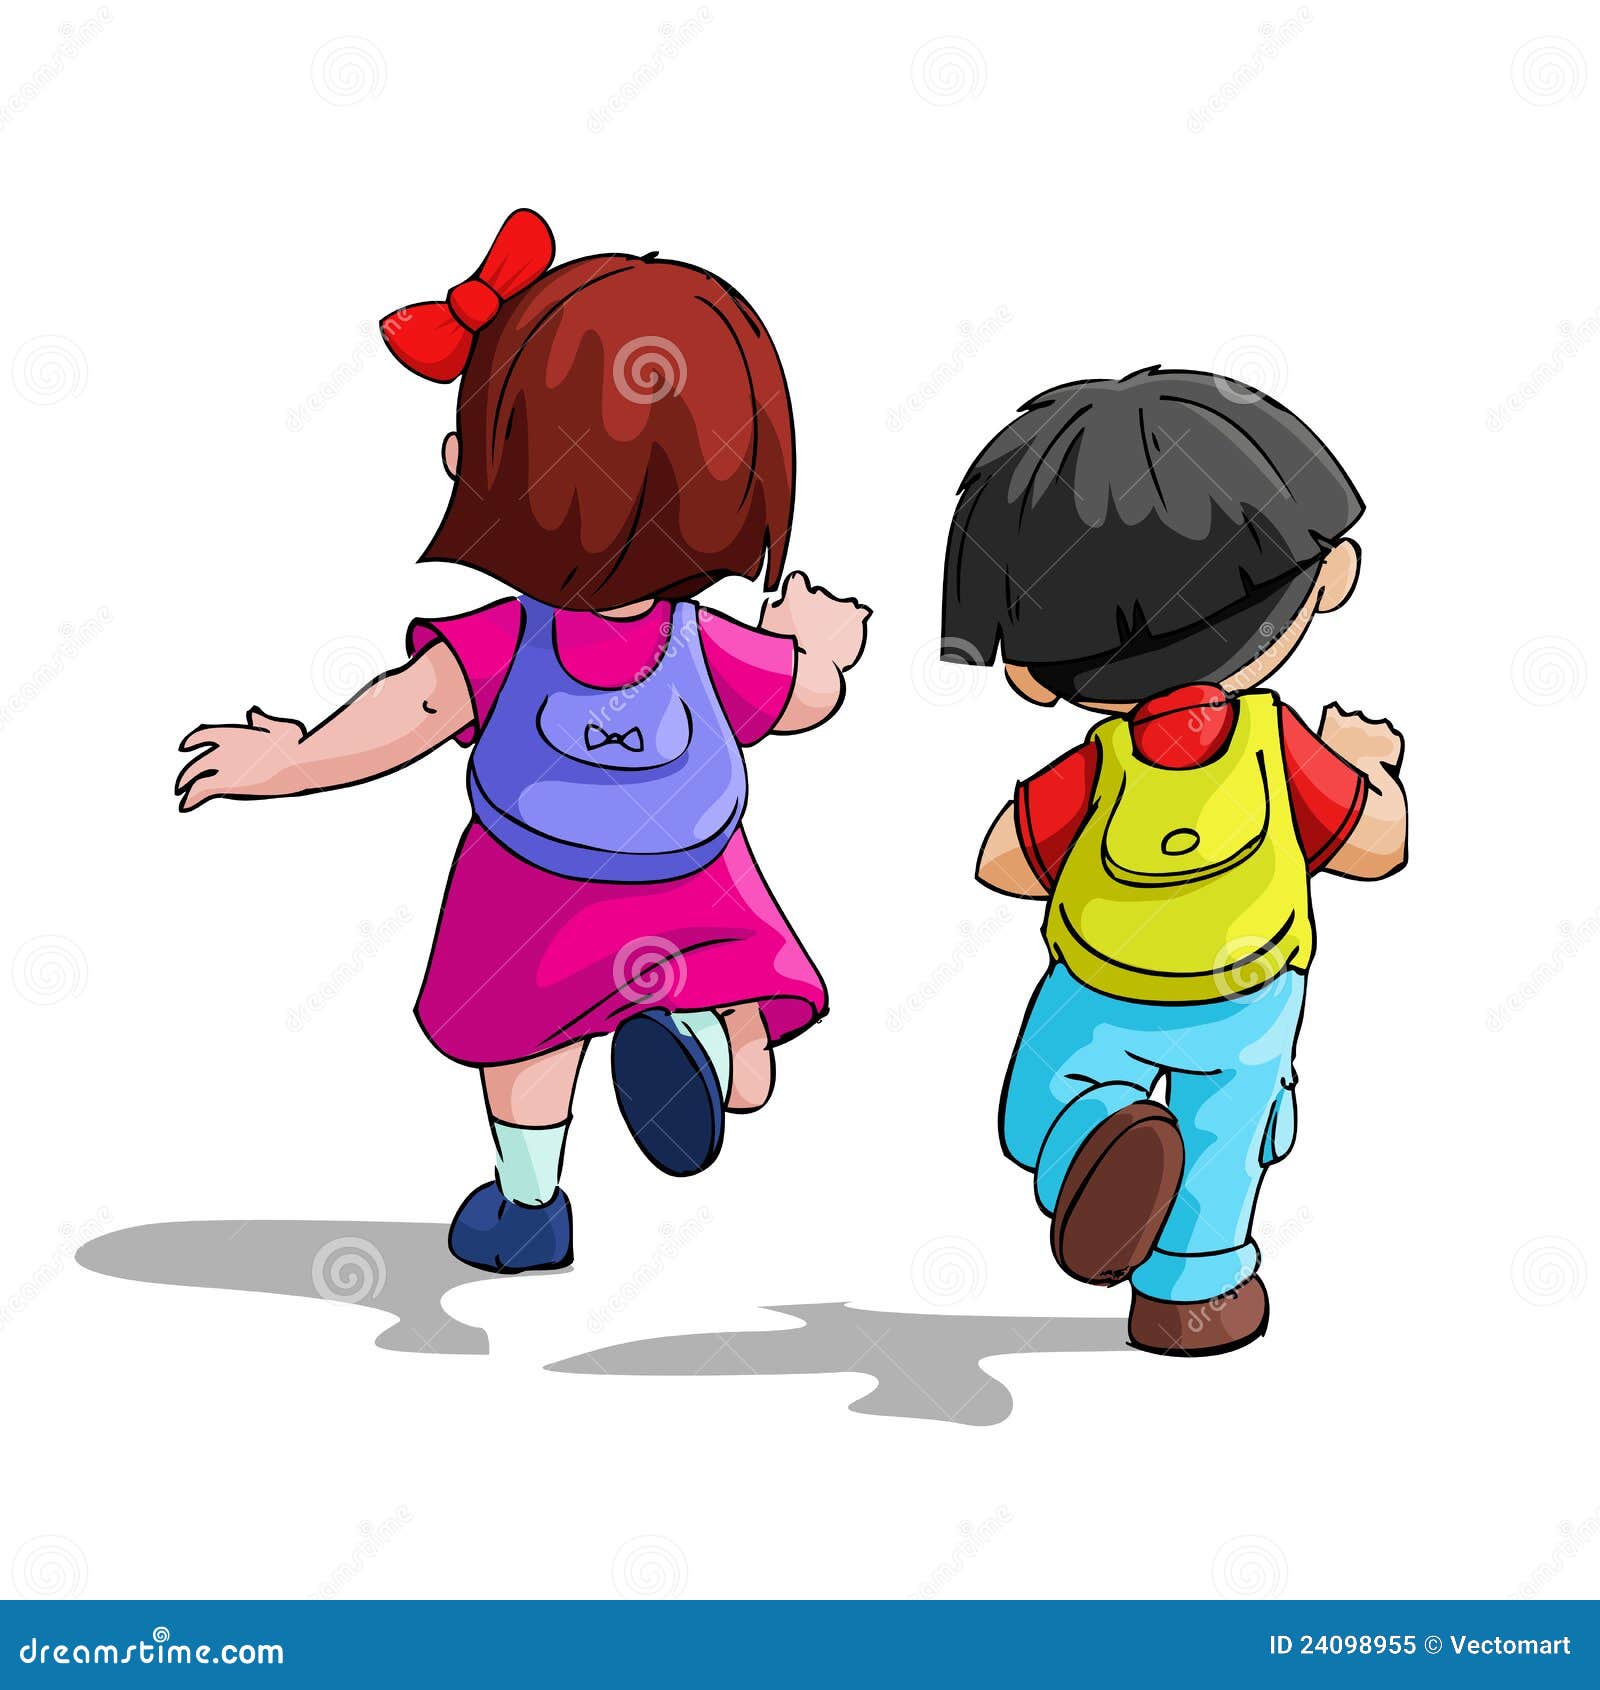 clipart going back to school - photo #18